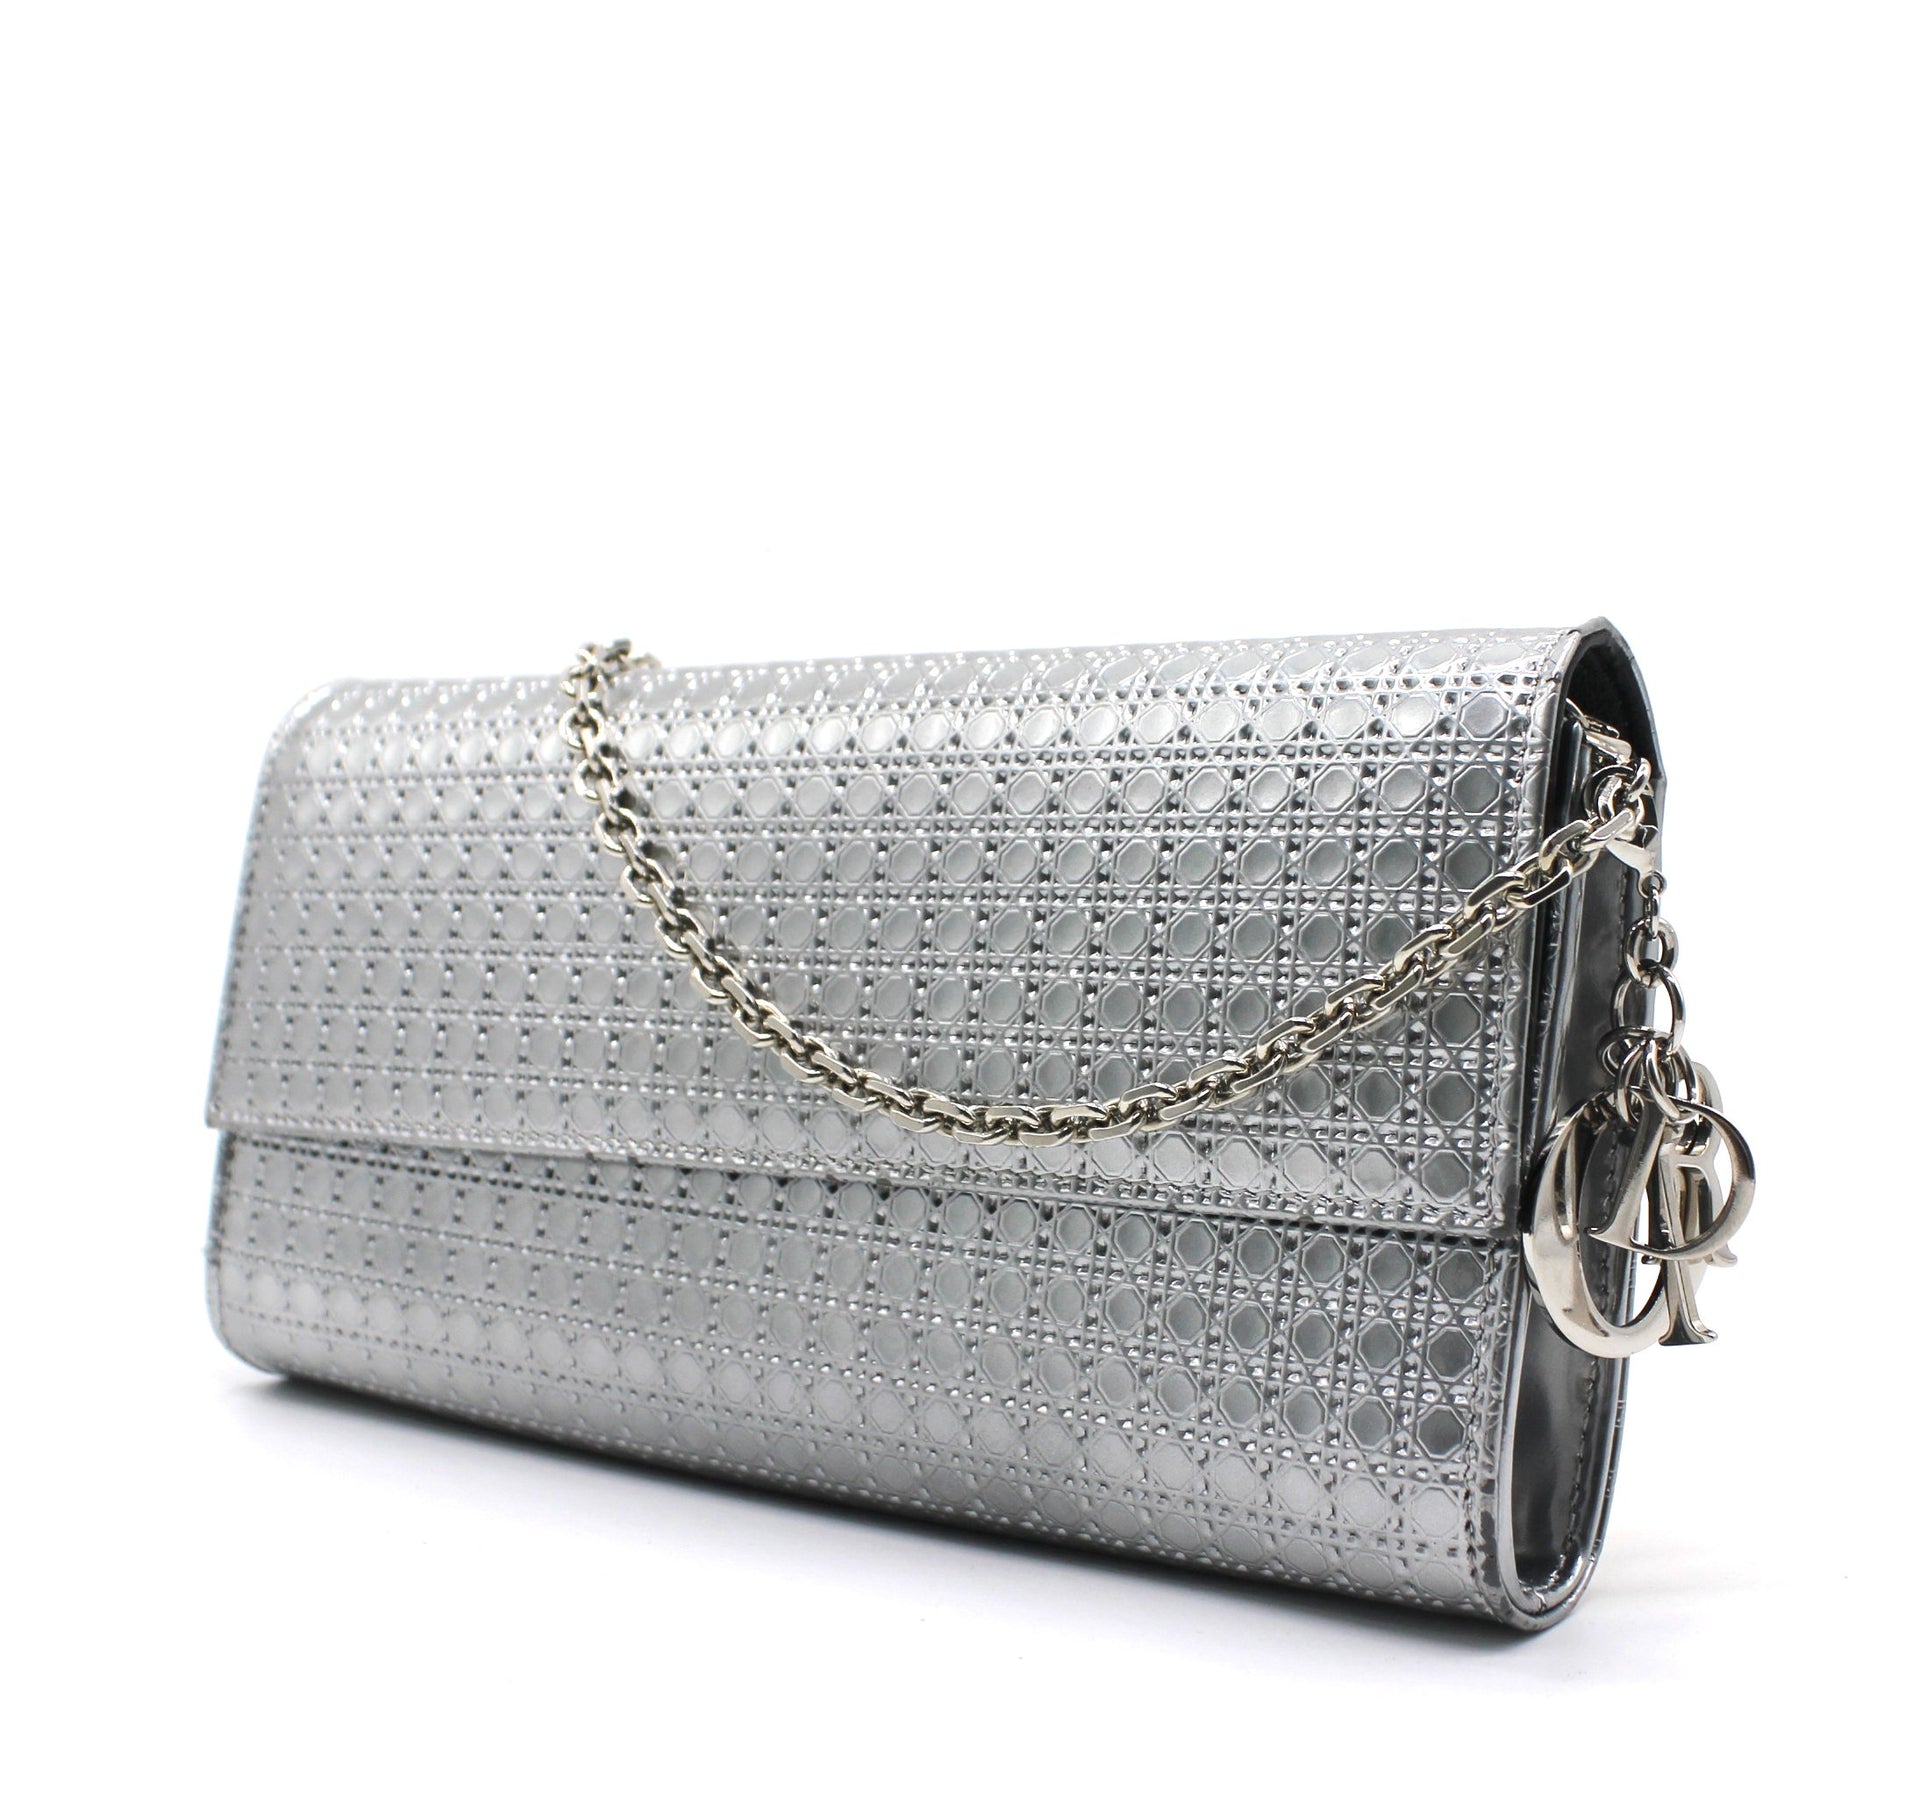 Christian Dior Croisiere Chain Wallet Micro Cannage Perforated Calfskin